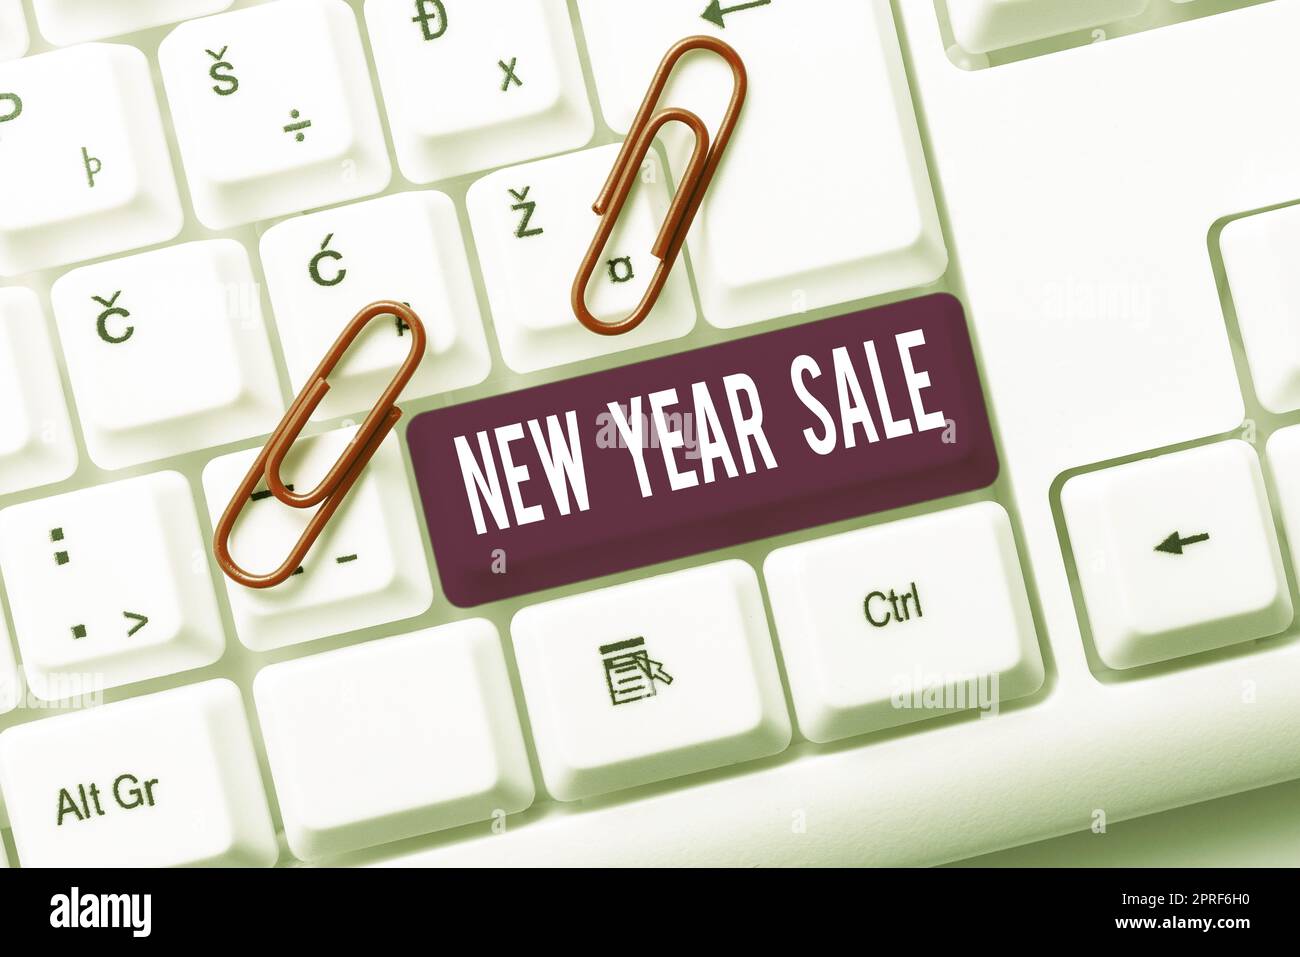 Handwriting text New Year Sale. Word Written on Final holiday season discounts price reductions Offers Piece Of Cardboard On Floor With Important Information Written In. Stock Photo